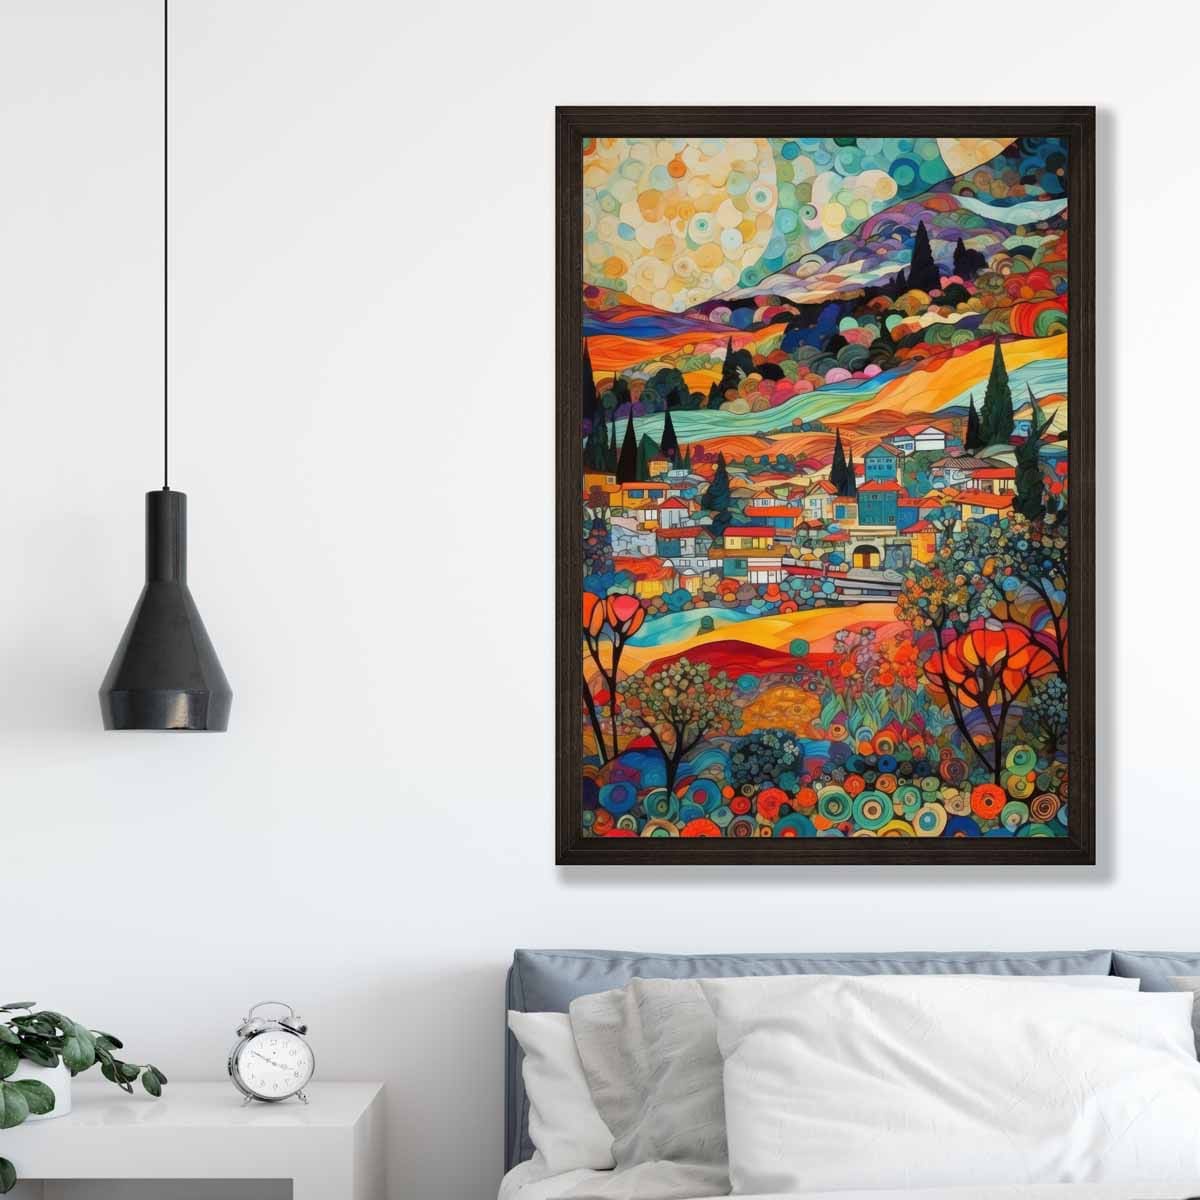 Colourful Cityscape Mosaic Style Abstract Painting Art Print